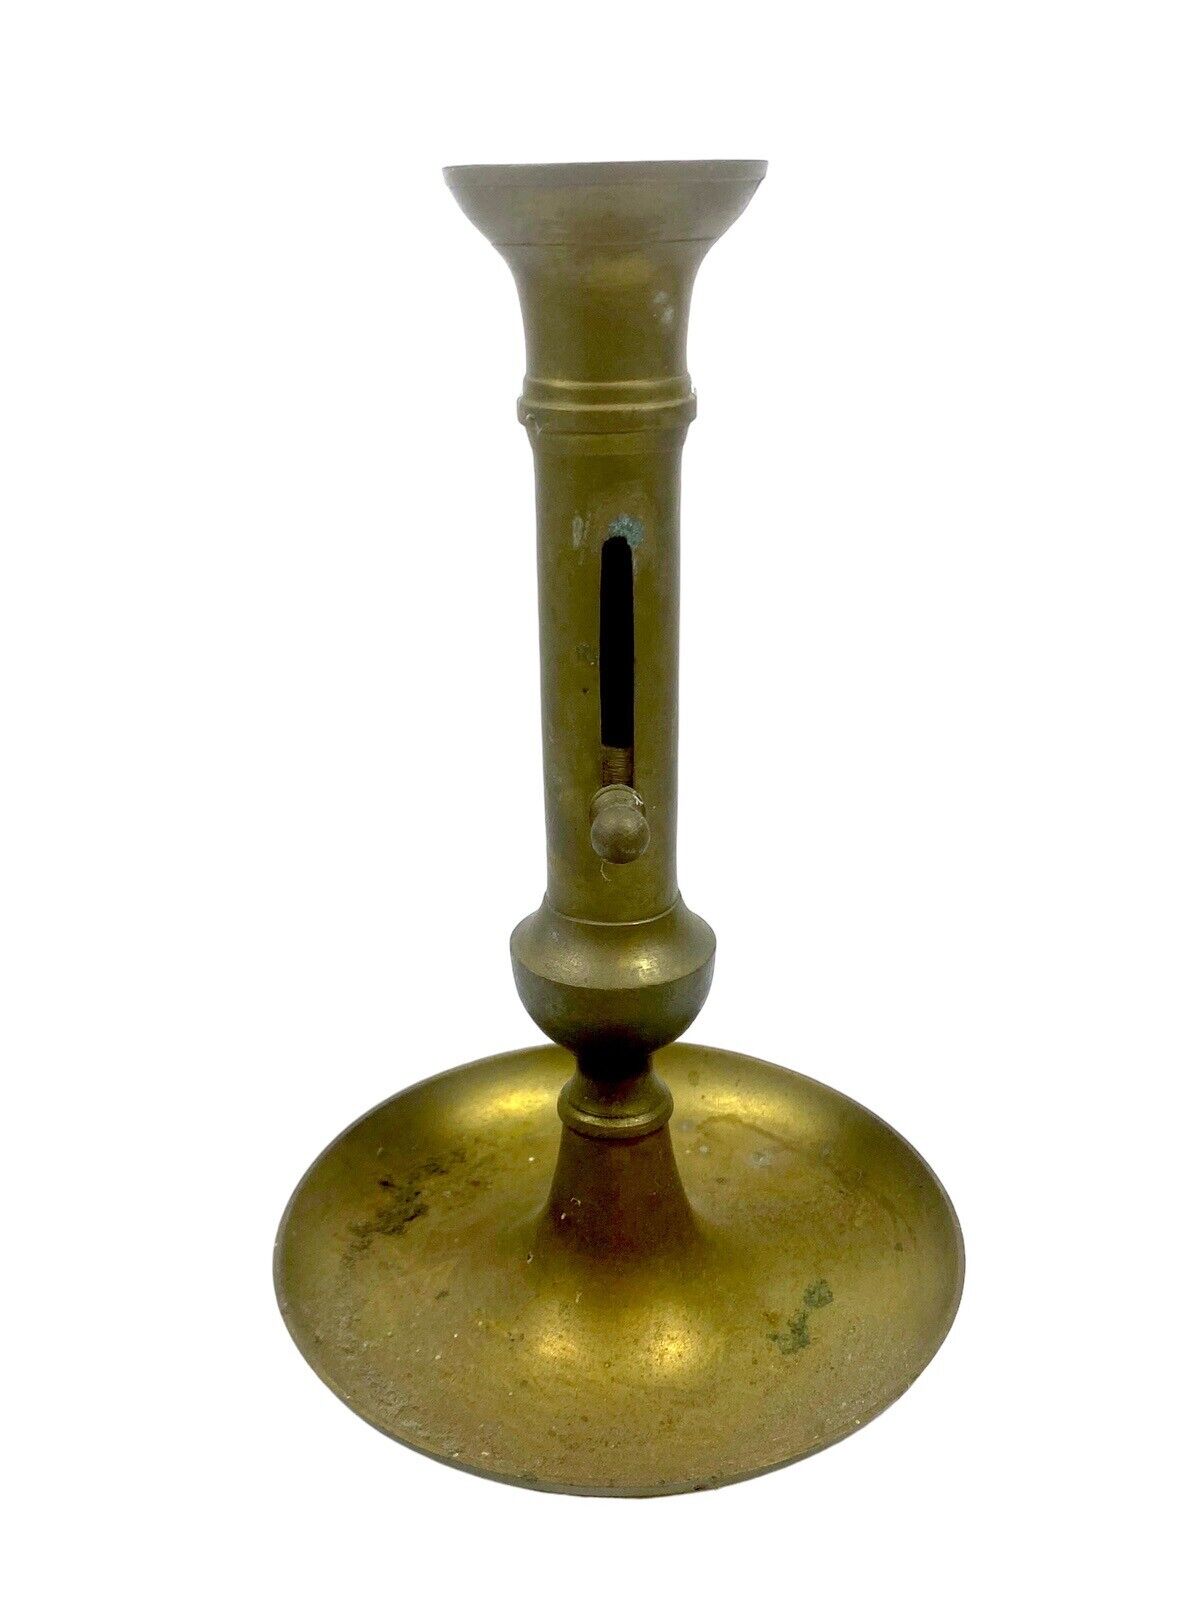 Antique Brass Candle Holder Adjustable IN Height Candlestick ~8.25” 1940s/50s